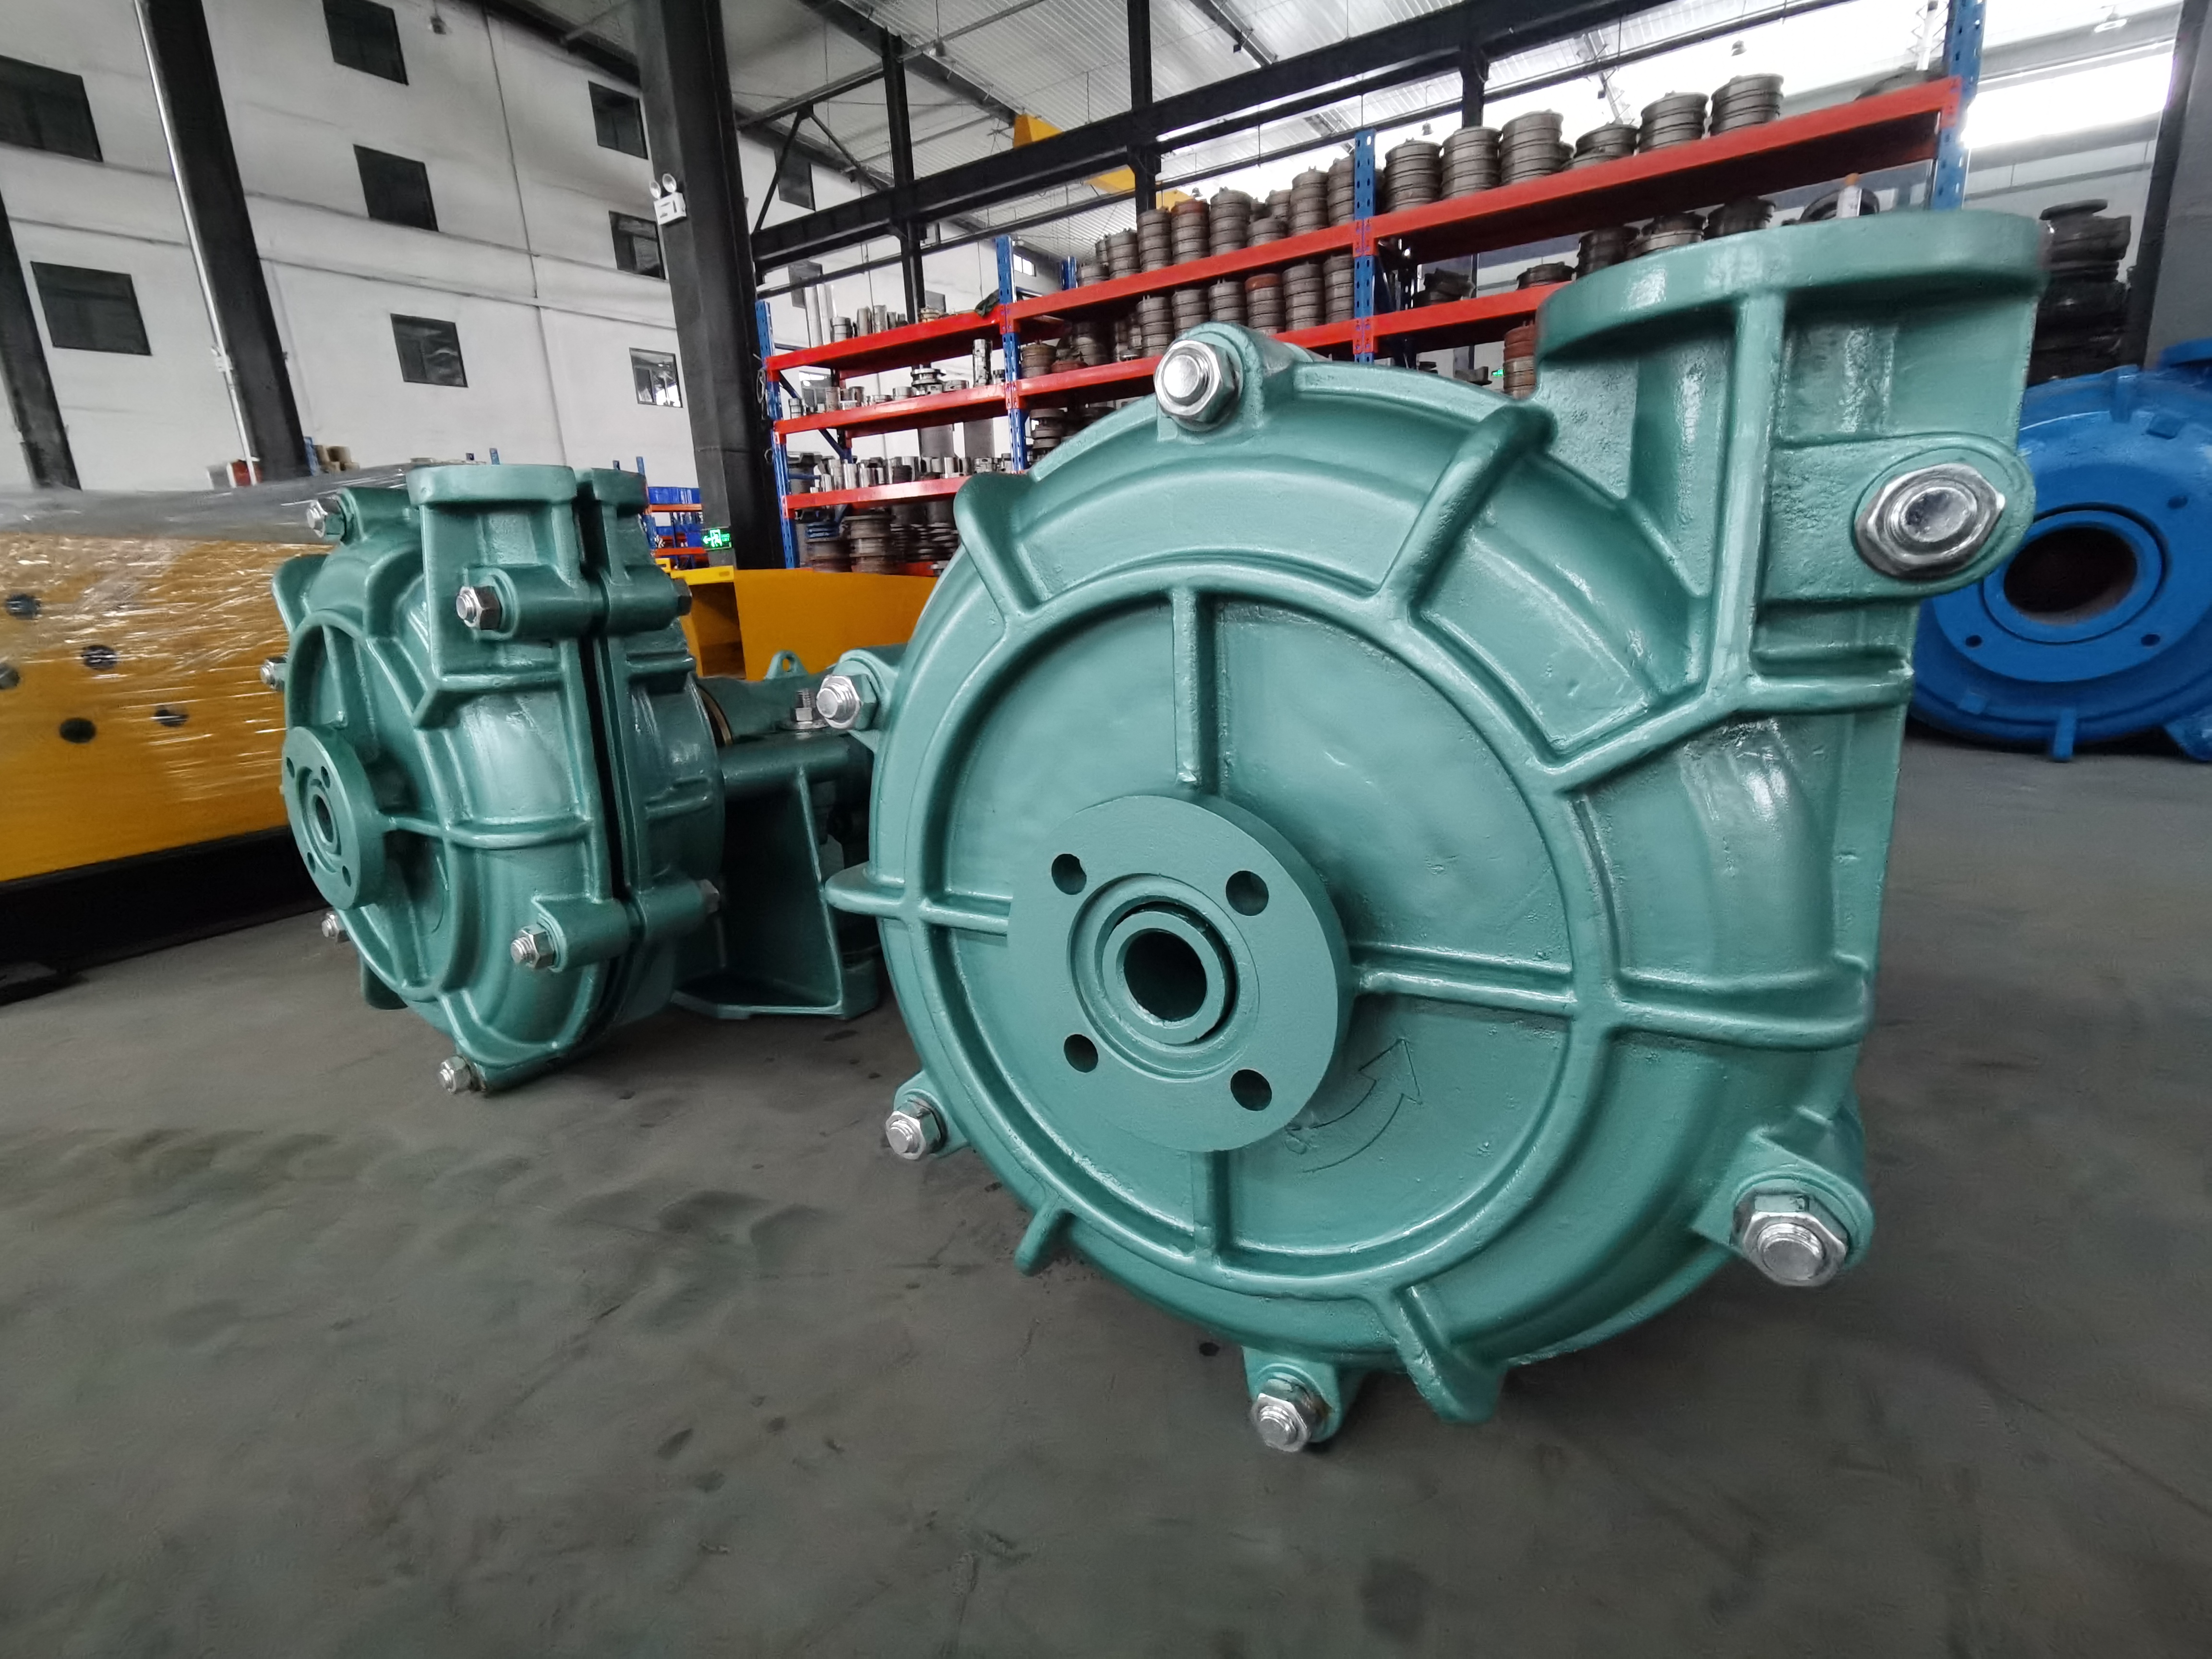 Characteristics and applications of HH high-lift slurry pumpThe HH type high-lift slurry pump is a type of high-lift slurry pump. Like the AH-ty...